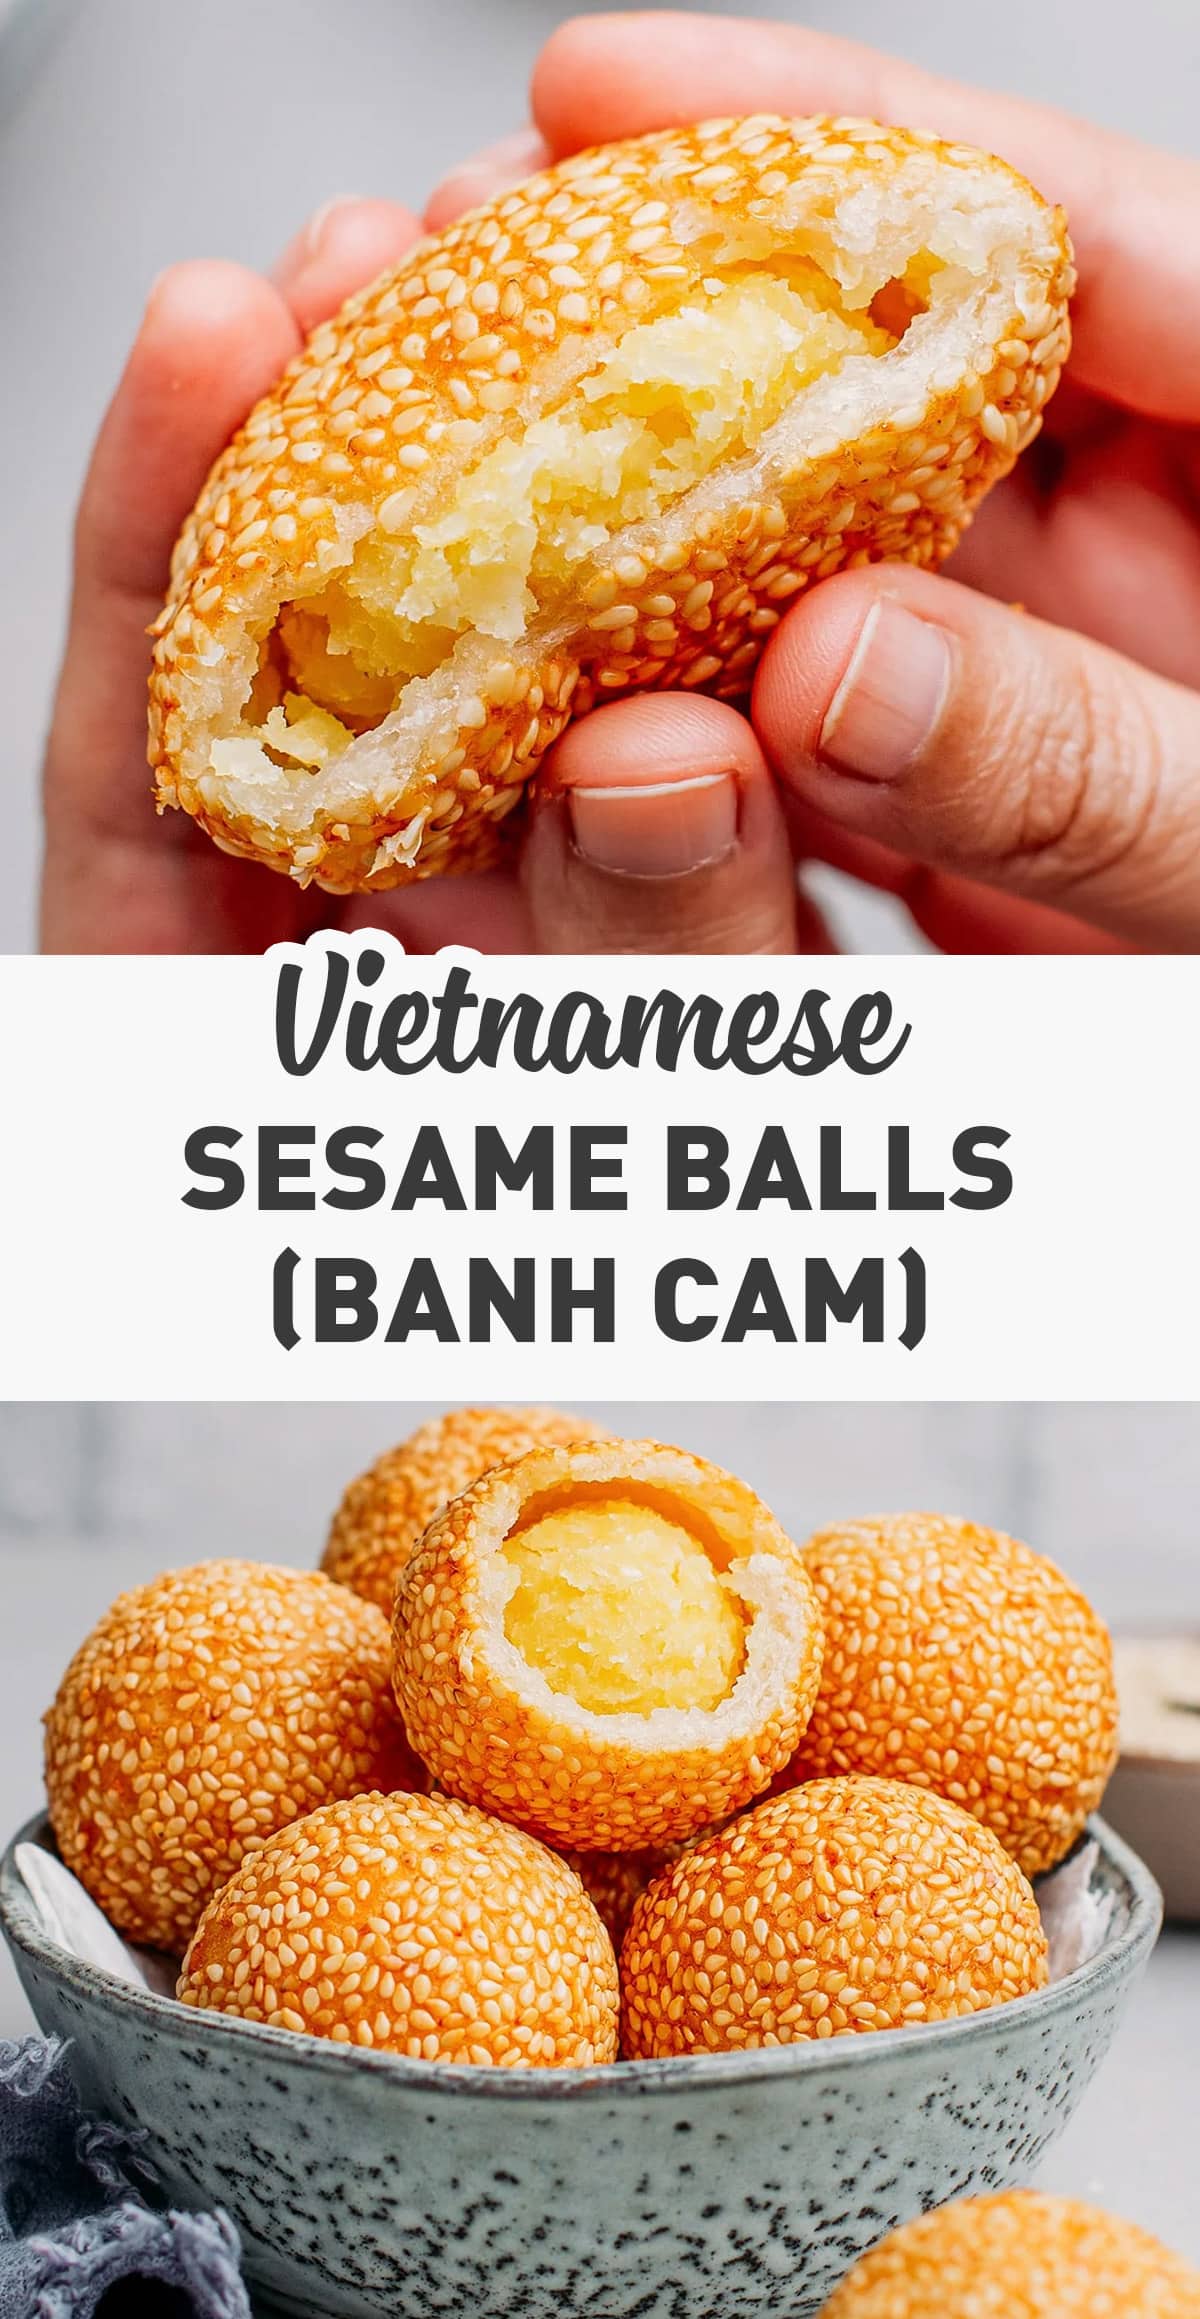 Learn how to make Banh cam at home! This traditional Vietnamese treat consists of sweet mung bean paste balls wrapped in glutinous rice flour wrappers and coated with sesame seeds before being deep fried to perfection. It's crispy, chewy, and so addicting. A must-try! #vietnamese #sesameballs